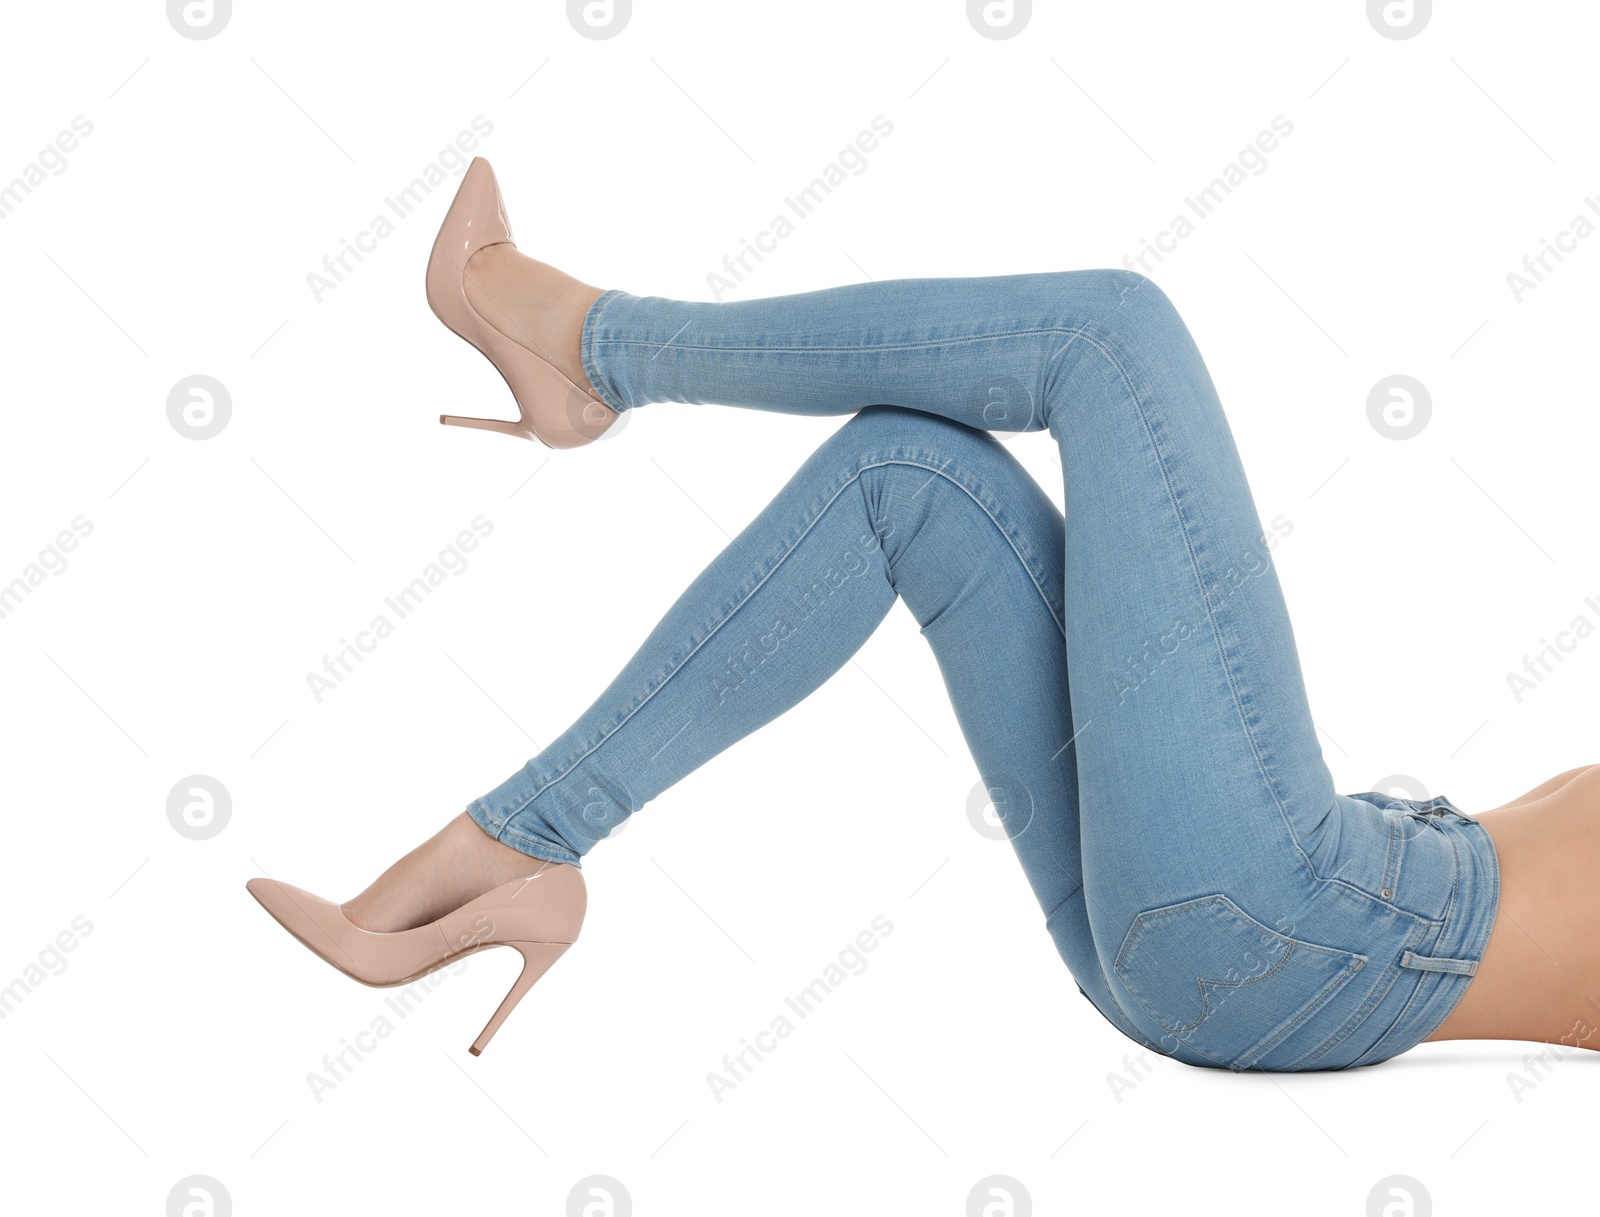 Photo of Woman wearing stylish light blue jeans and high heels shoes on white background, closeup